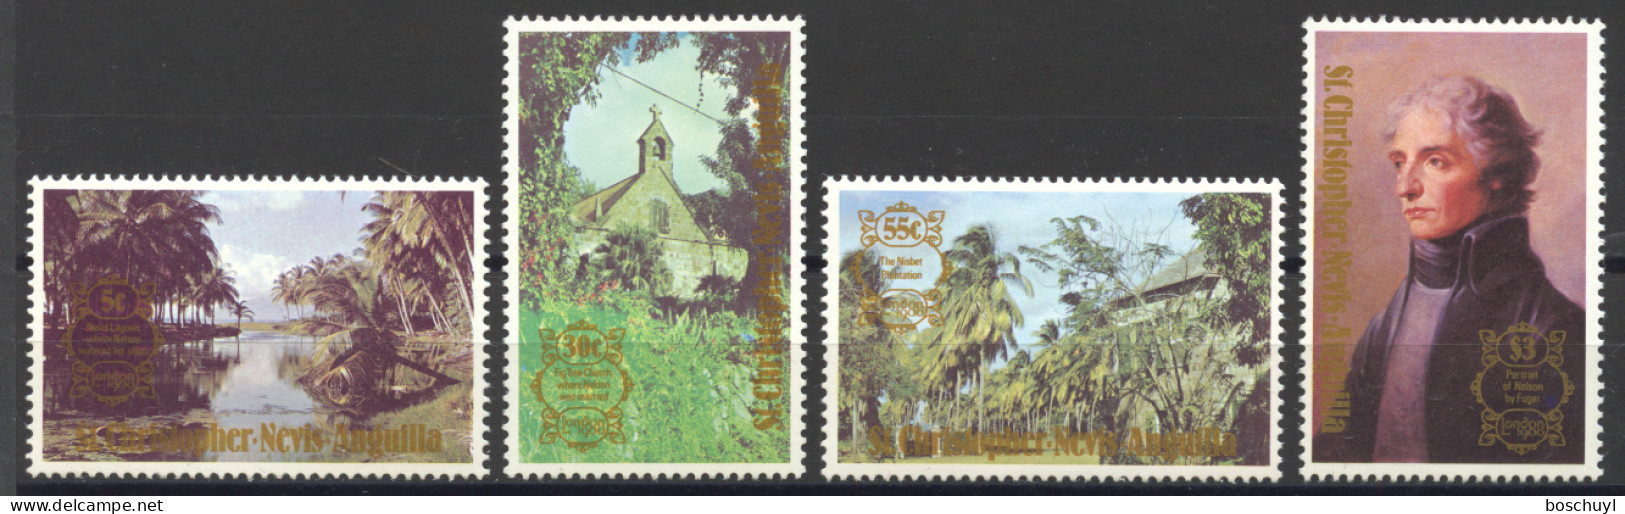 St Christopher, Nevis And Anguilla, 1980, London Stamp Exhibition, Lord Nelson, Lagoon, Church, MNH, Michel 392-395 - St.Cristopher-Nevis & Anguilla (...-1980)